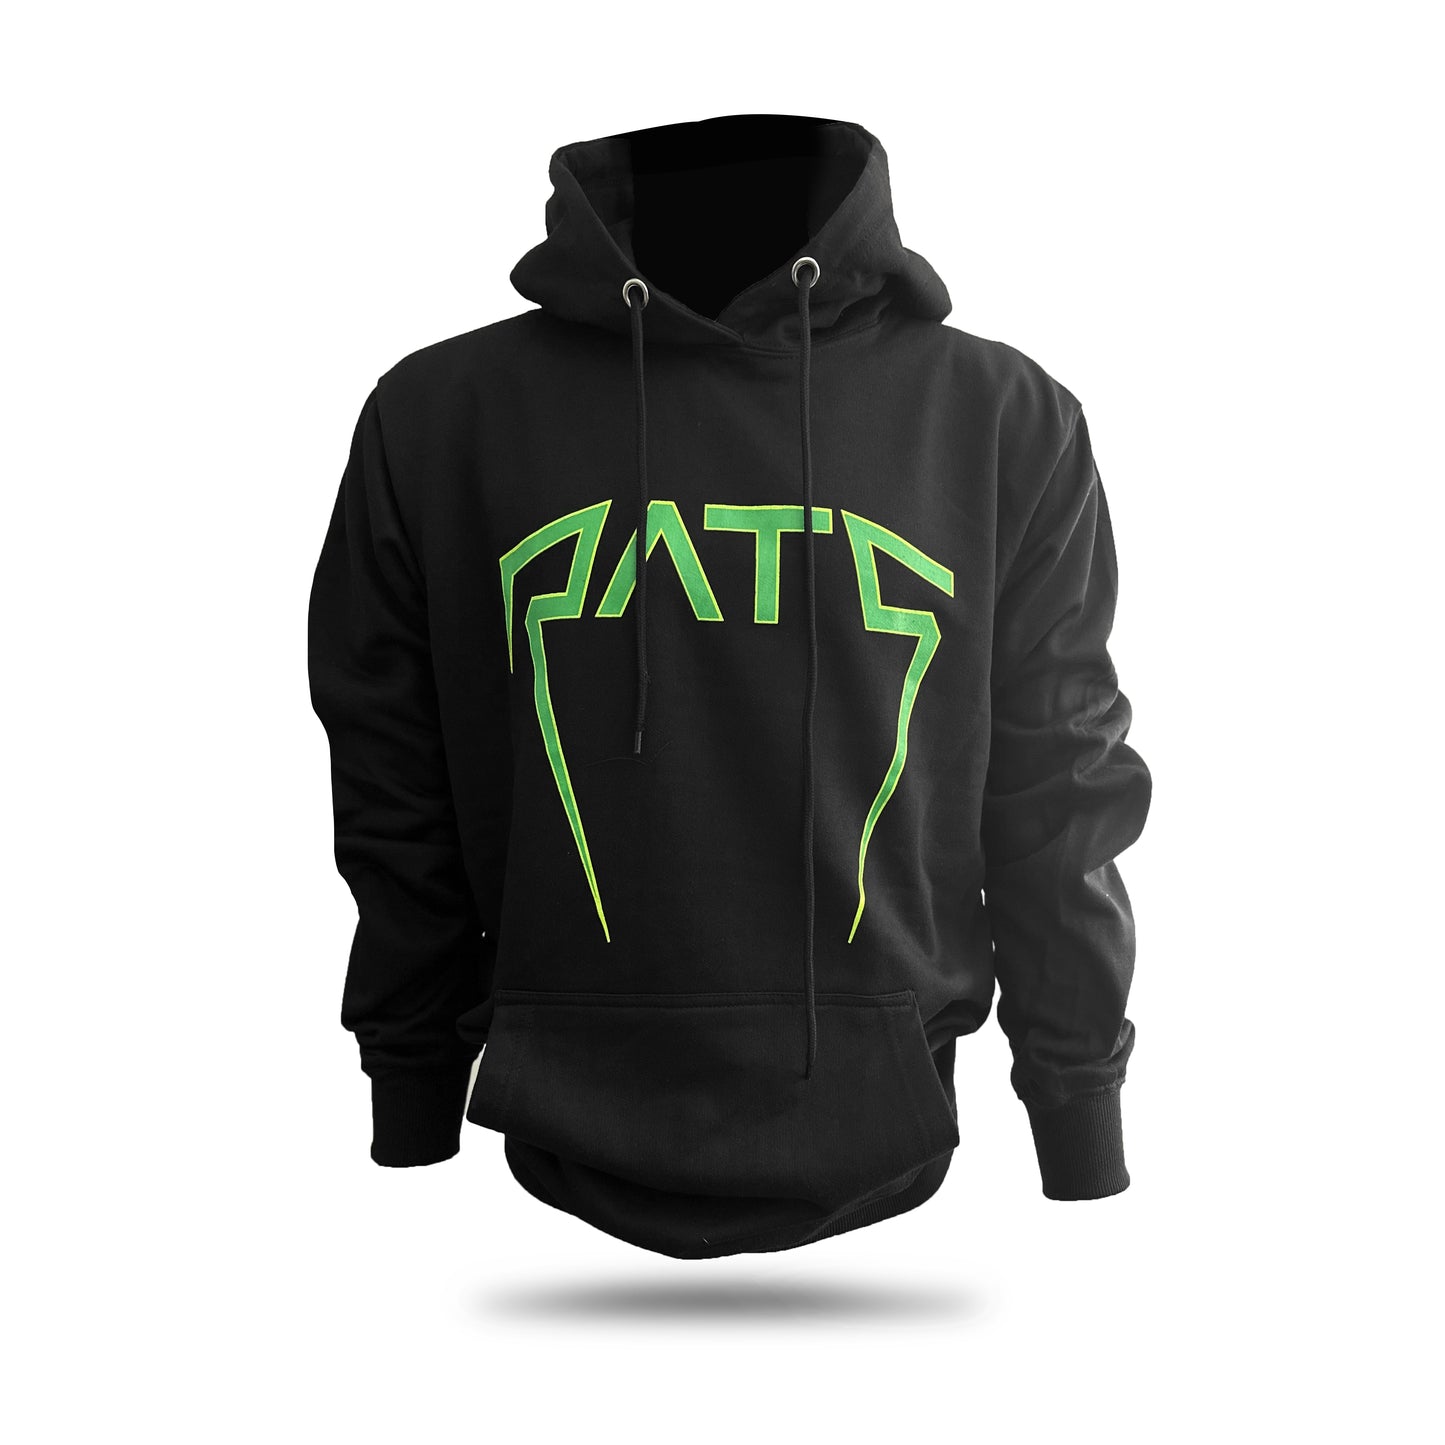 RATS Hoodie Black and Green